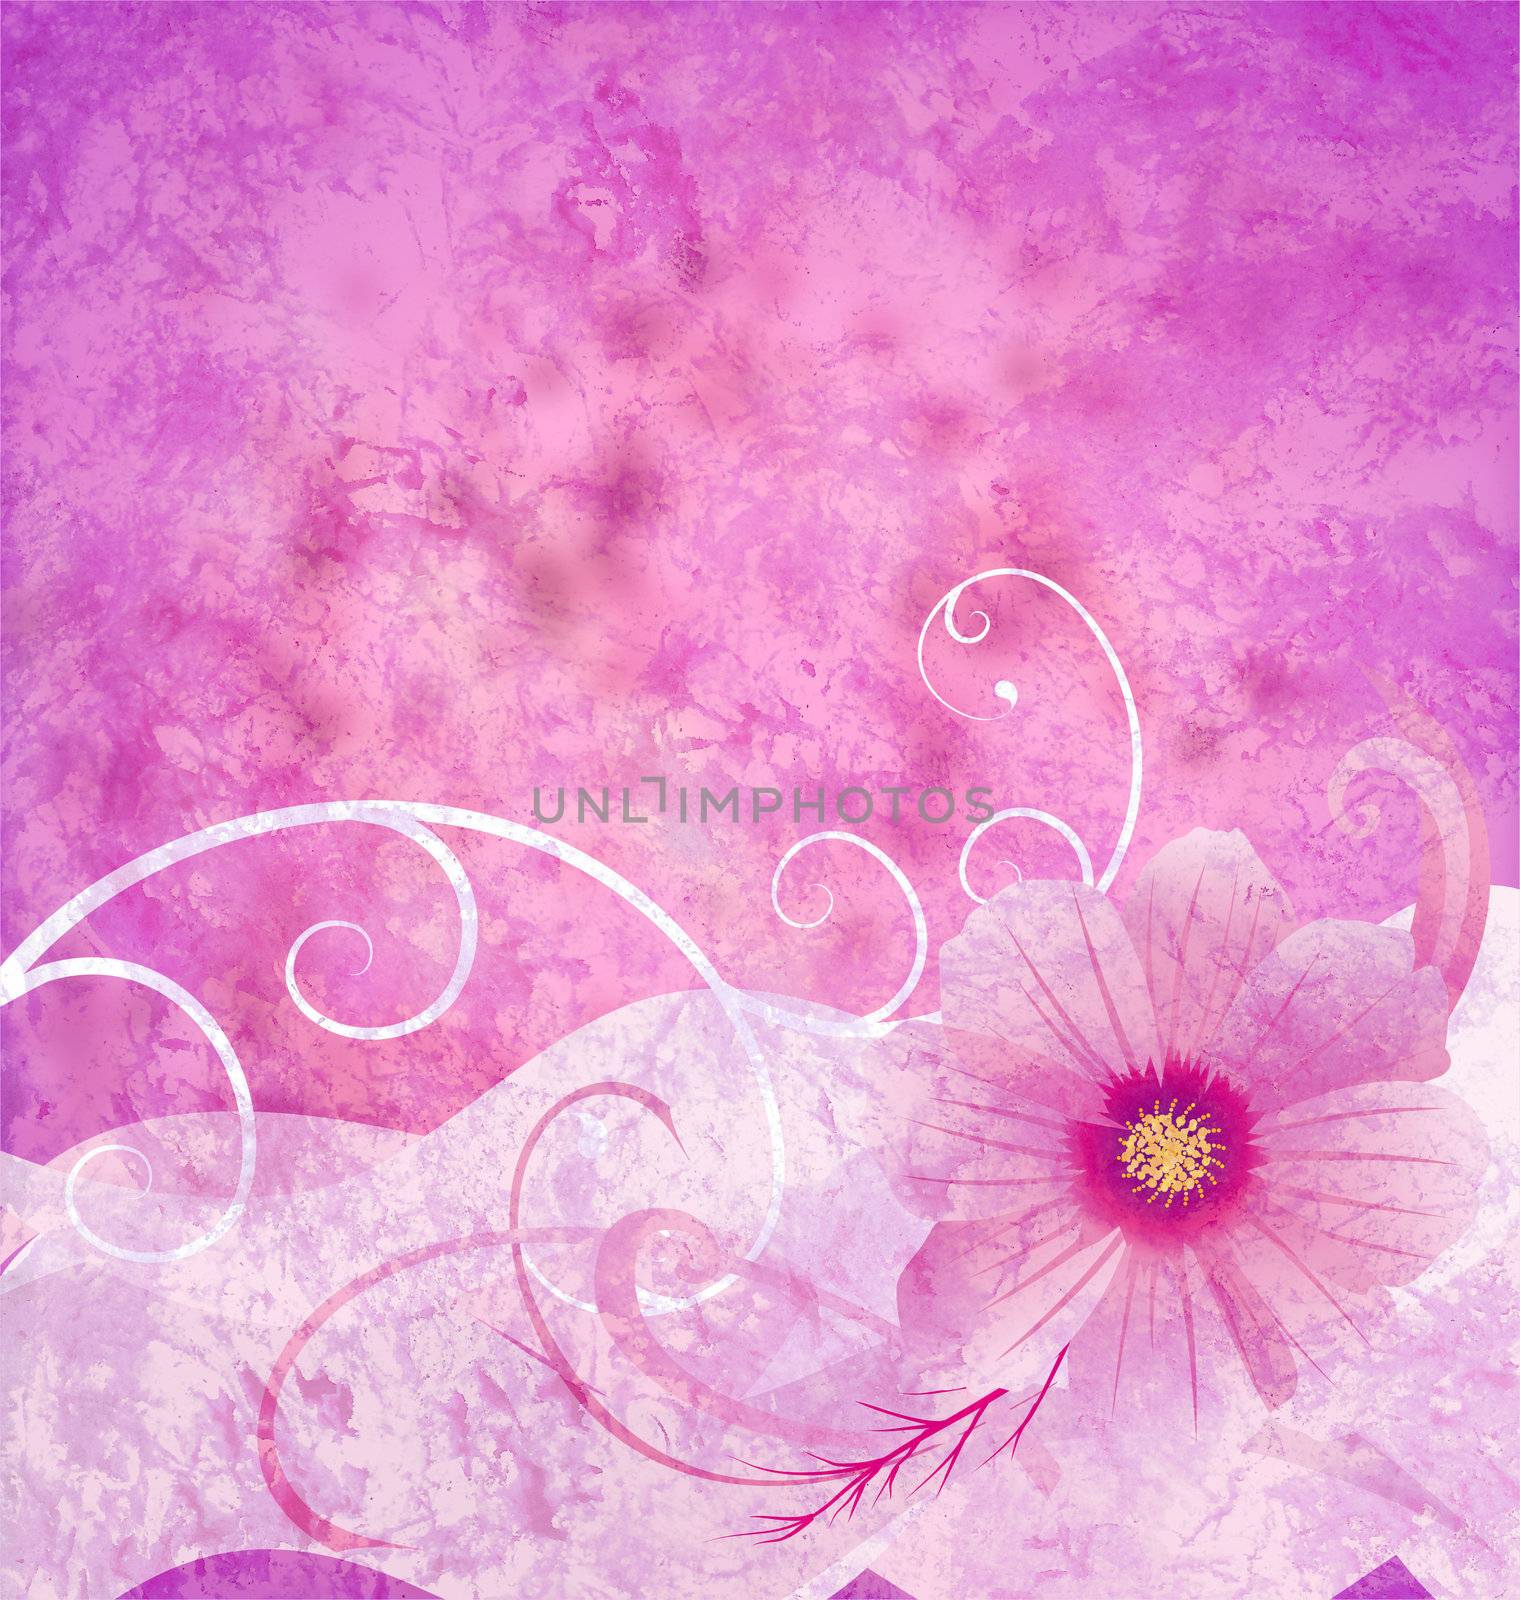 pink grange background textured idea with  ornamented pink cosmos flower